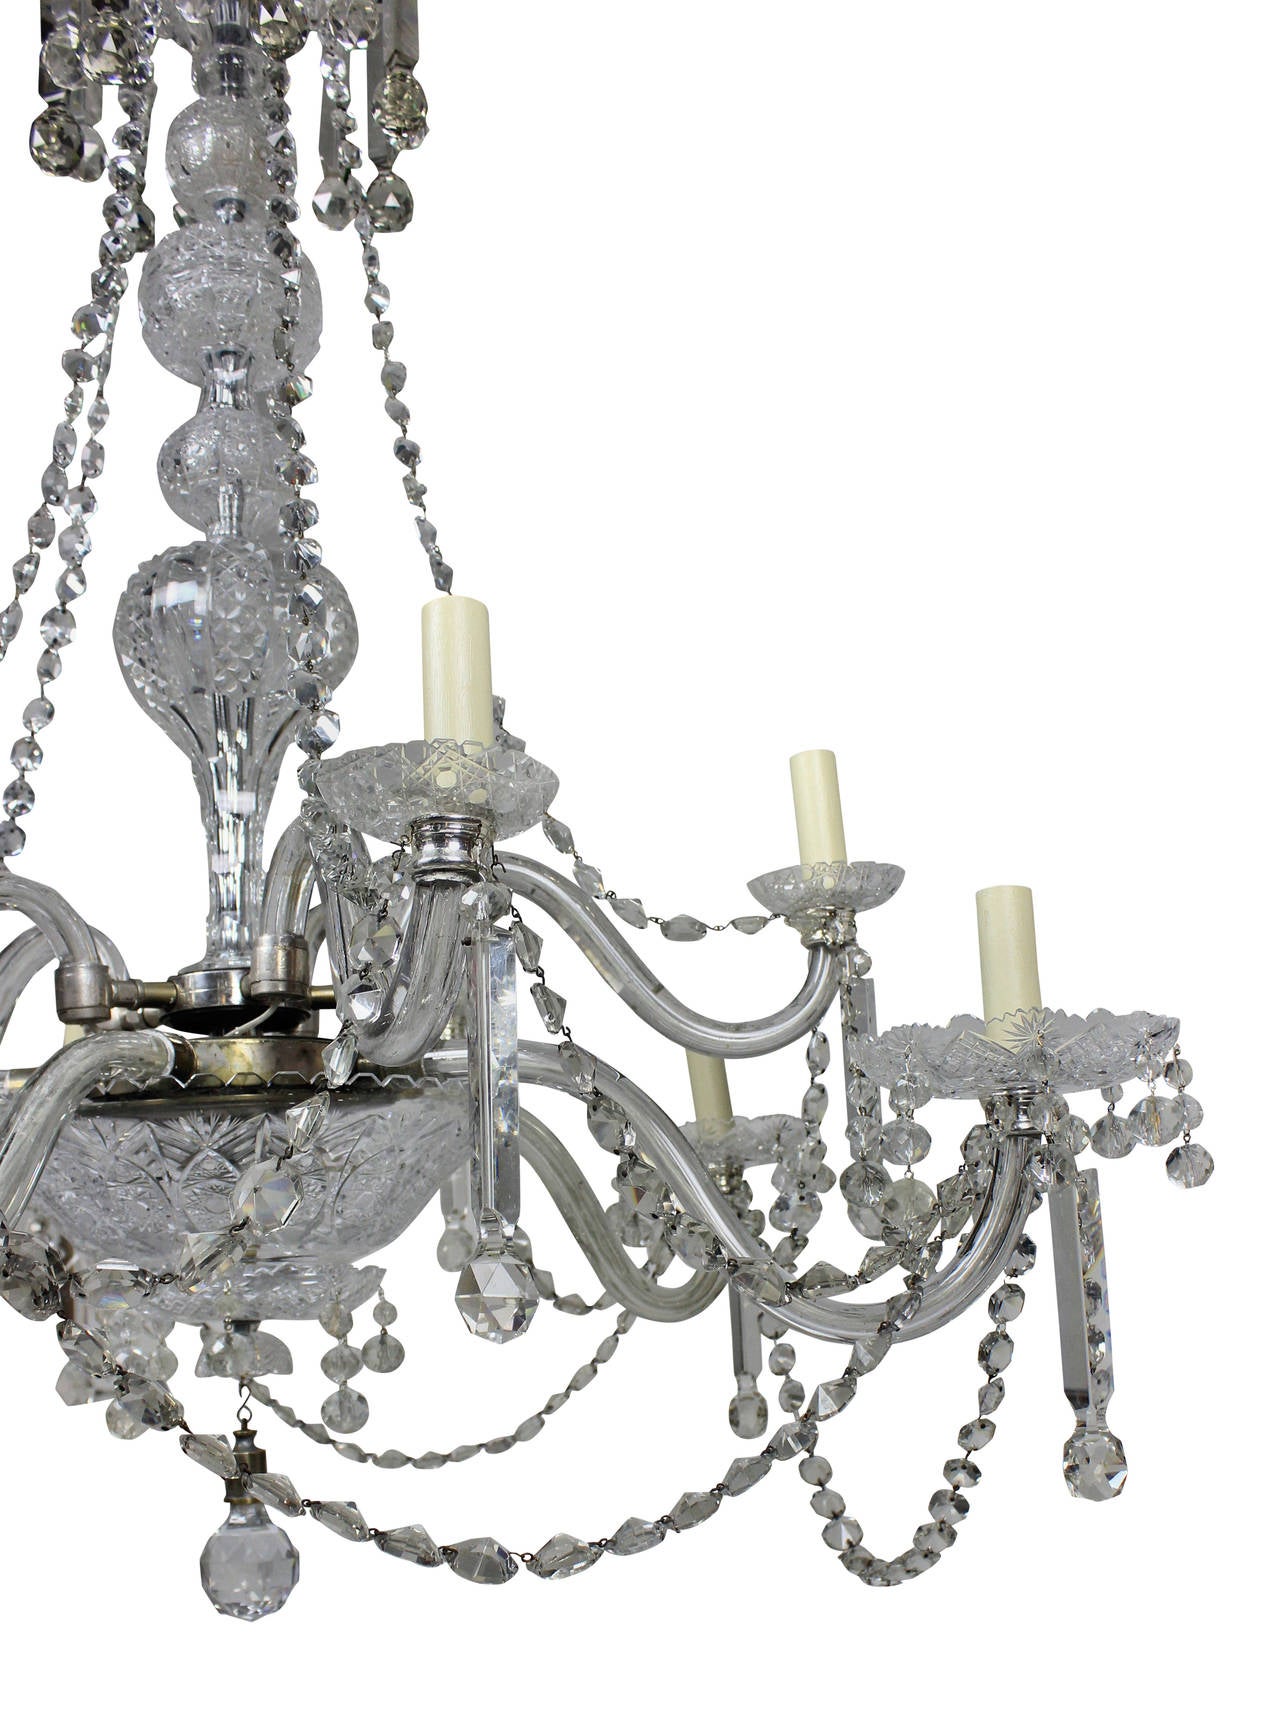 A large English cut-glass chandelier of good quality. Profusely hand cut throughout, hung with good quality prism drops, formerly a gasolier.